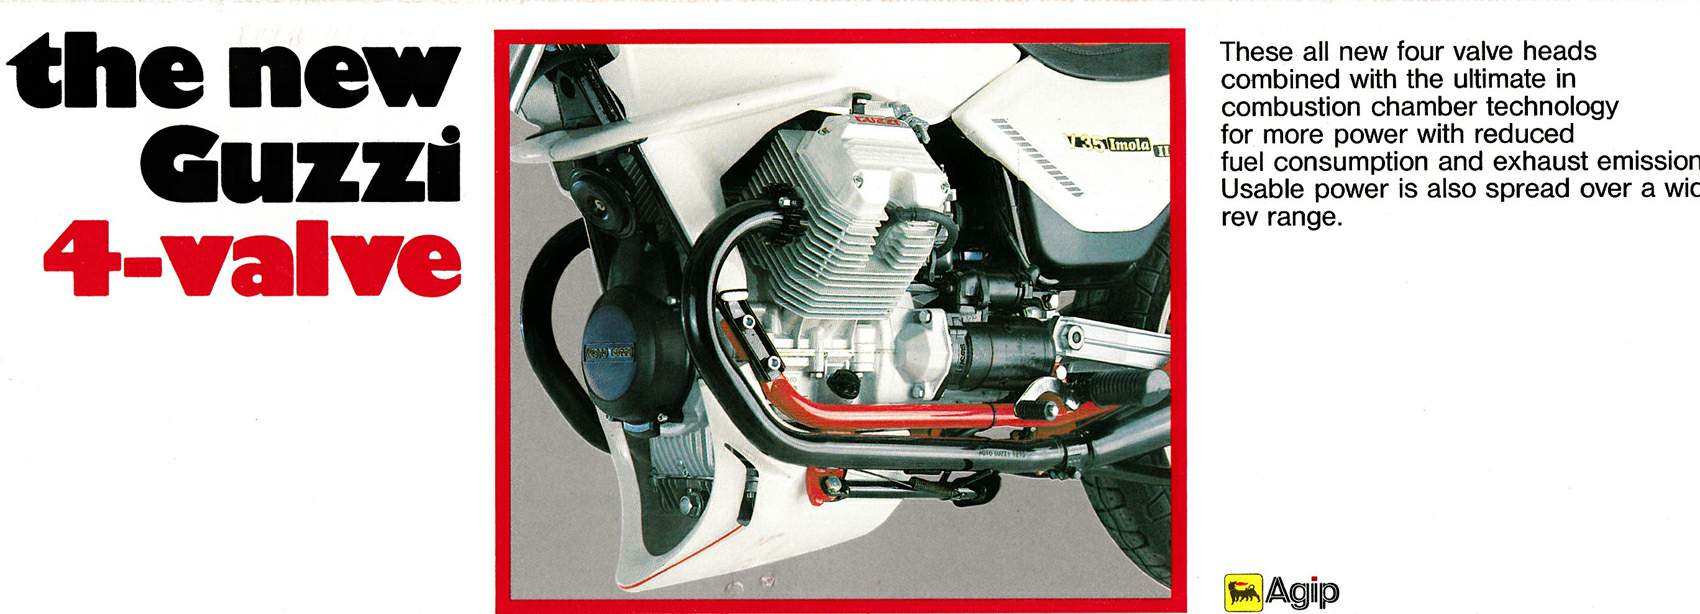 Moto Guzzi V 35 Imola II For Sale Specifications, Price and Images